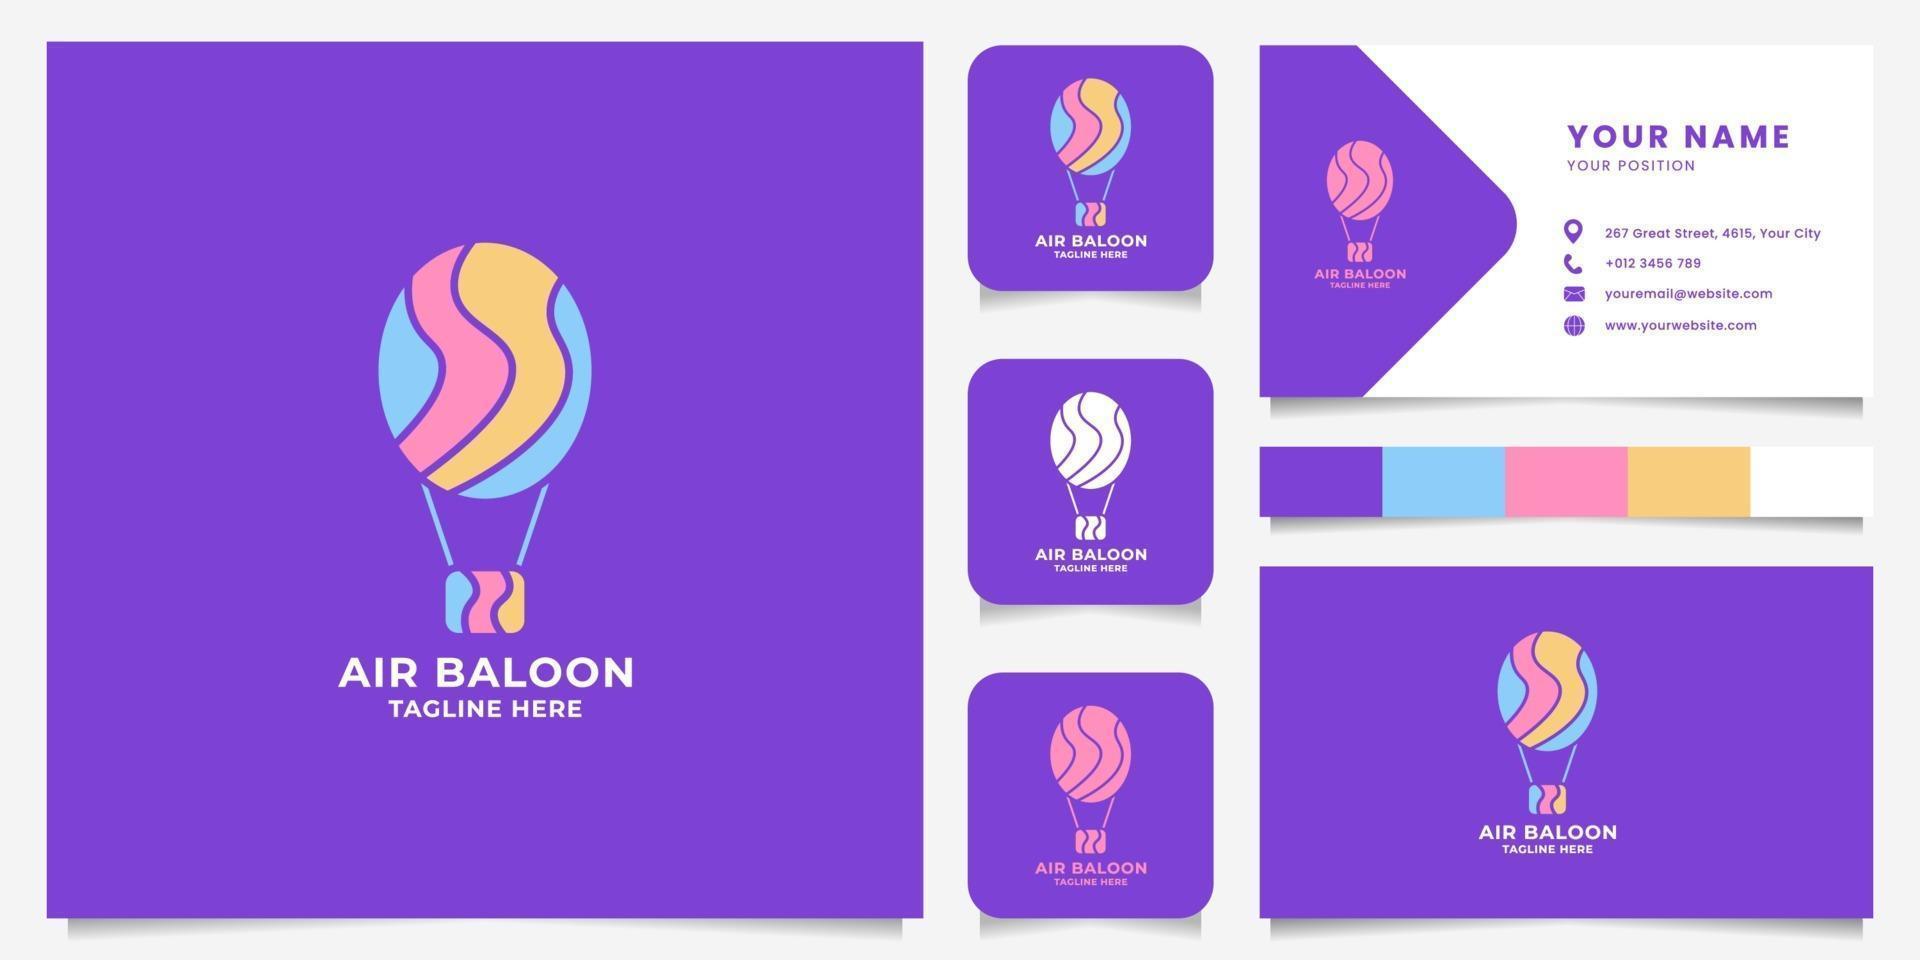 Colorful Air Balloon Logo with Business Card Template vector